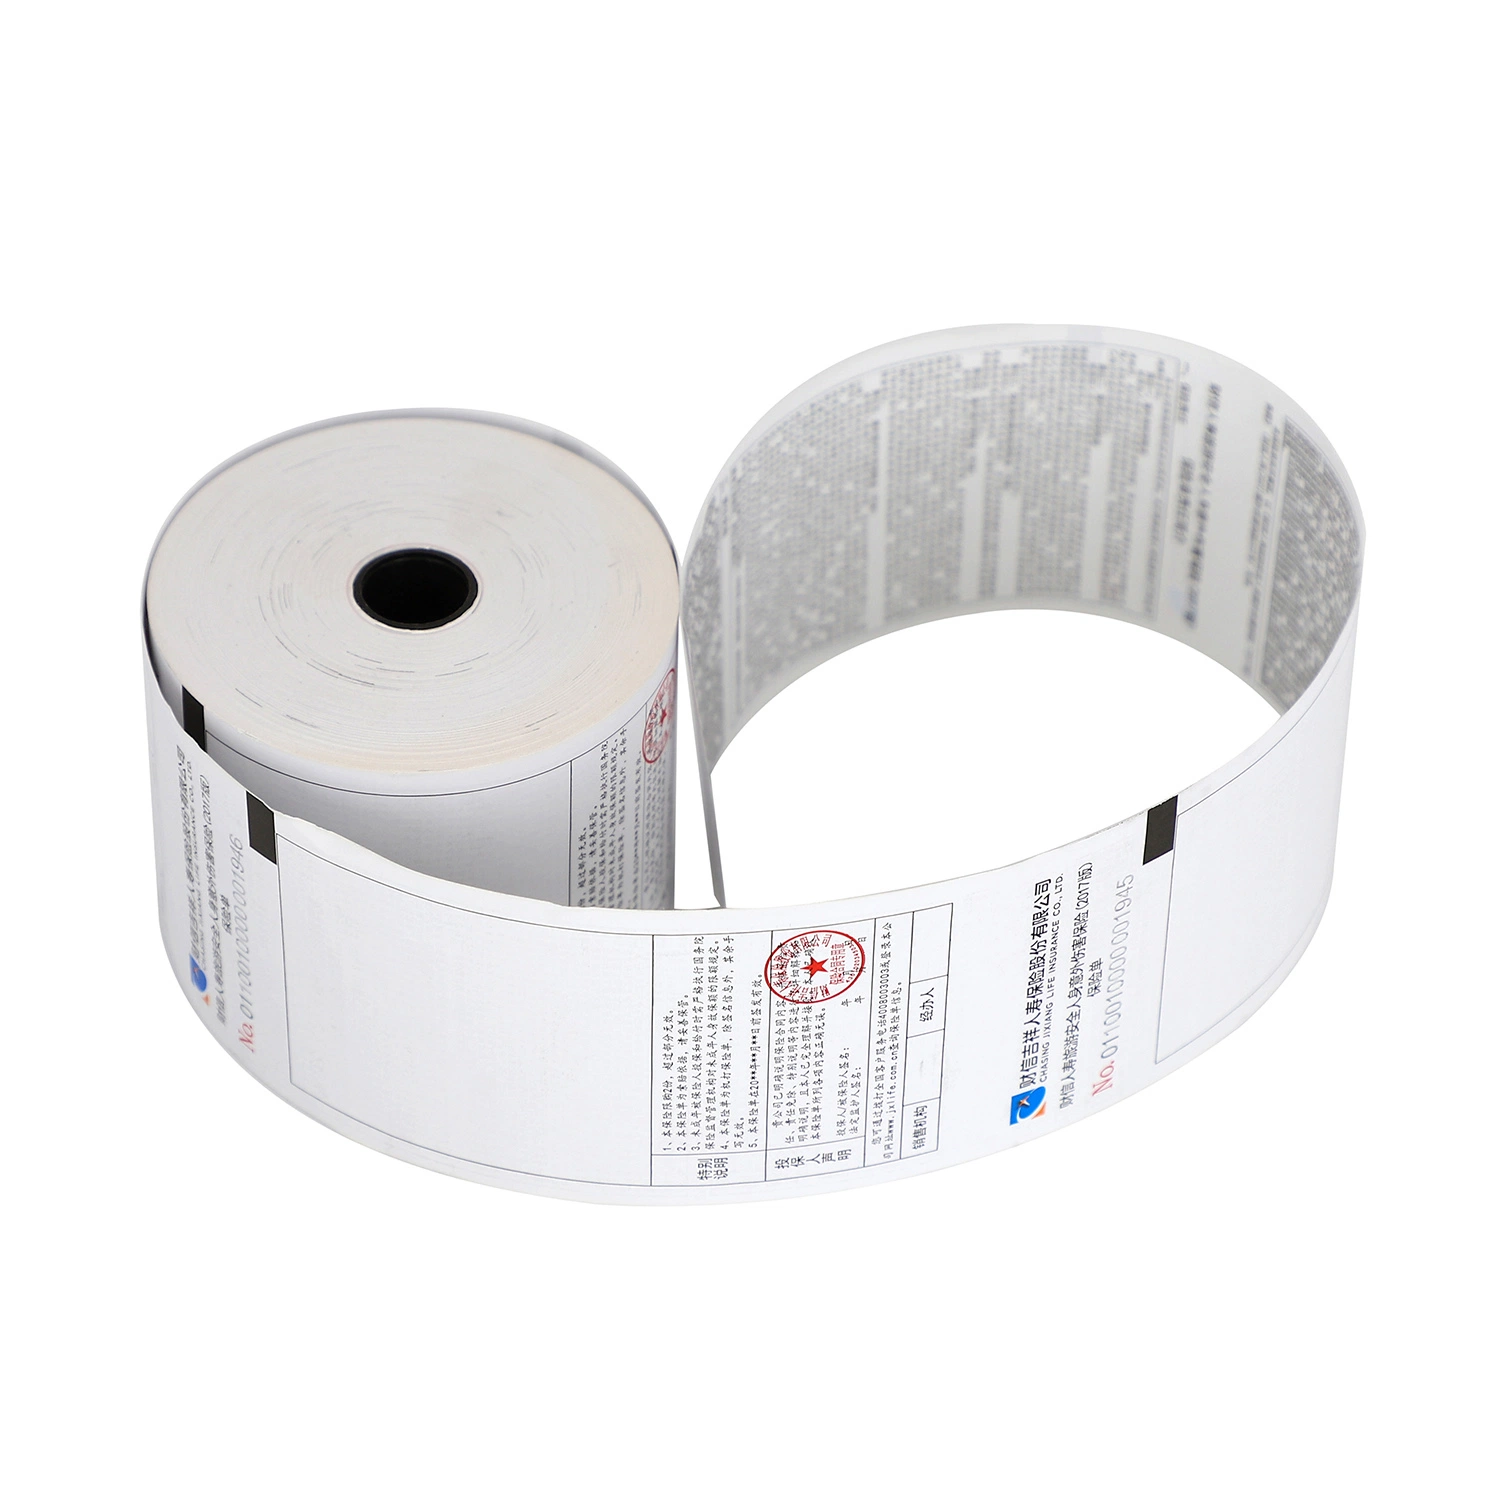 China Manufacture Thermal Receipt Printer Paper